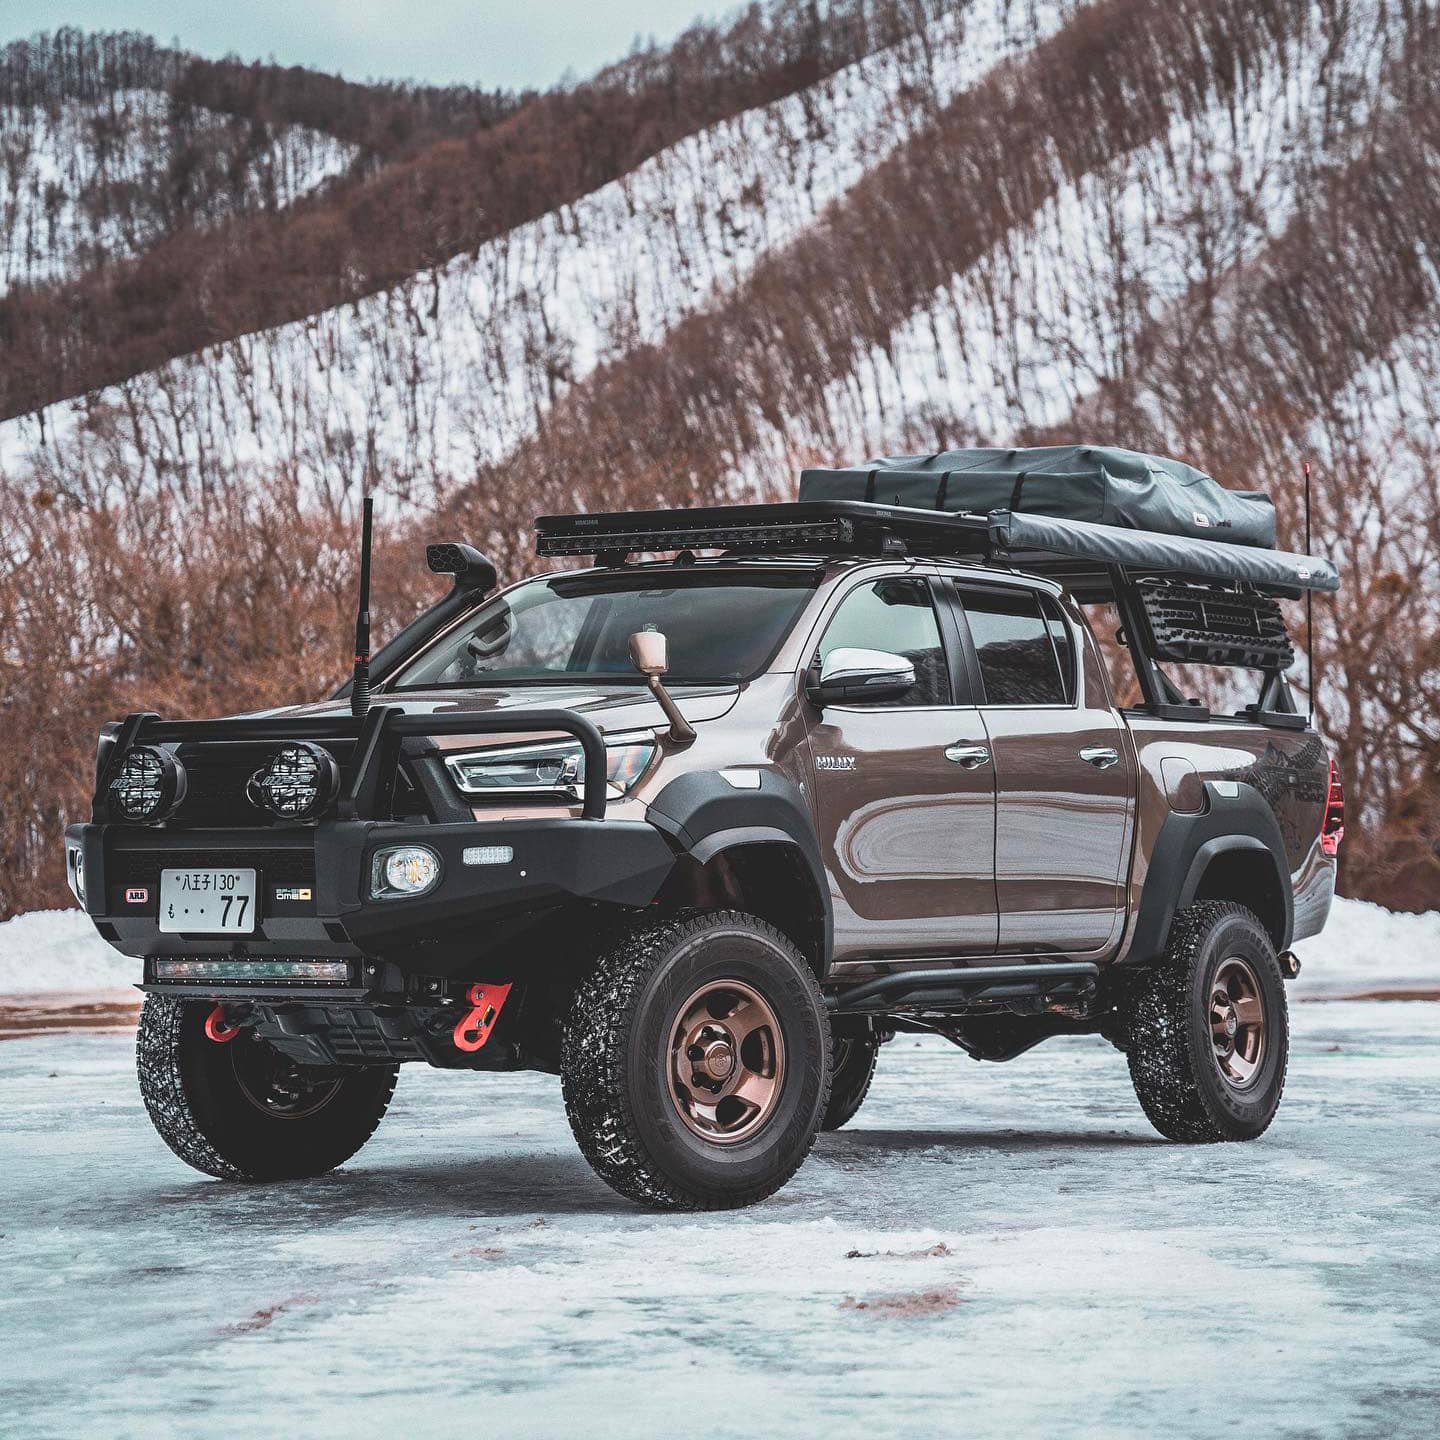 2019 Toyota Hilux 8th Gen overland project with off-road mods